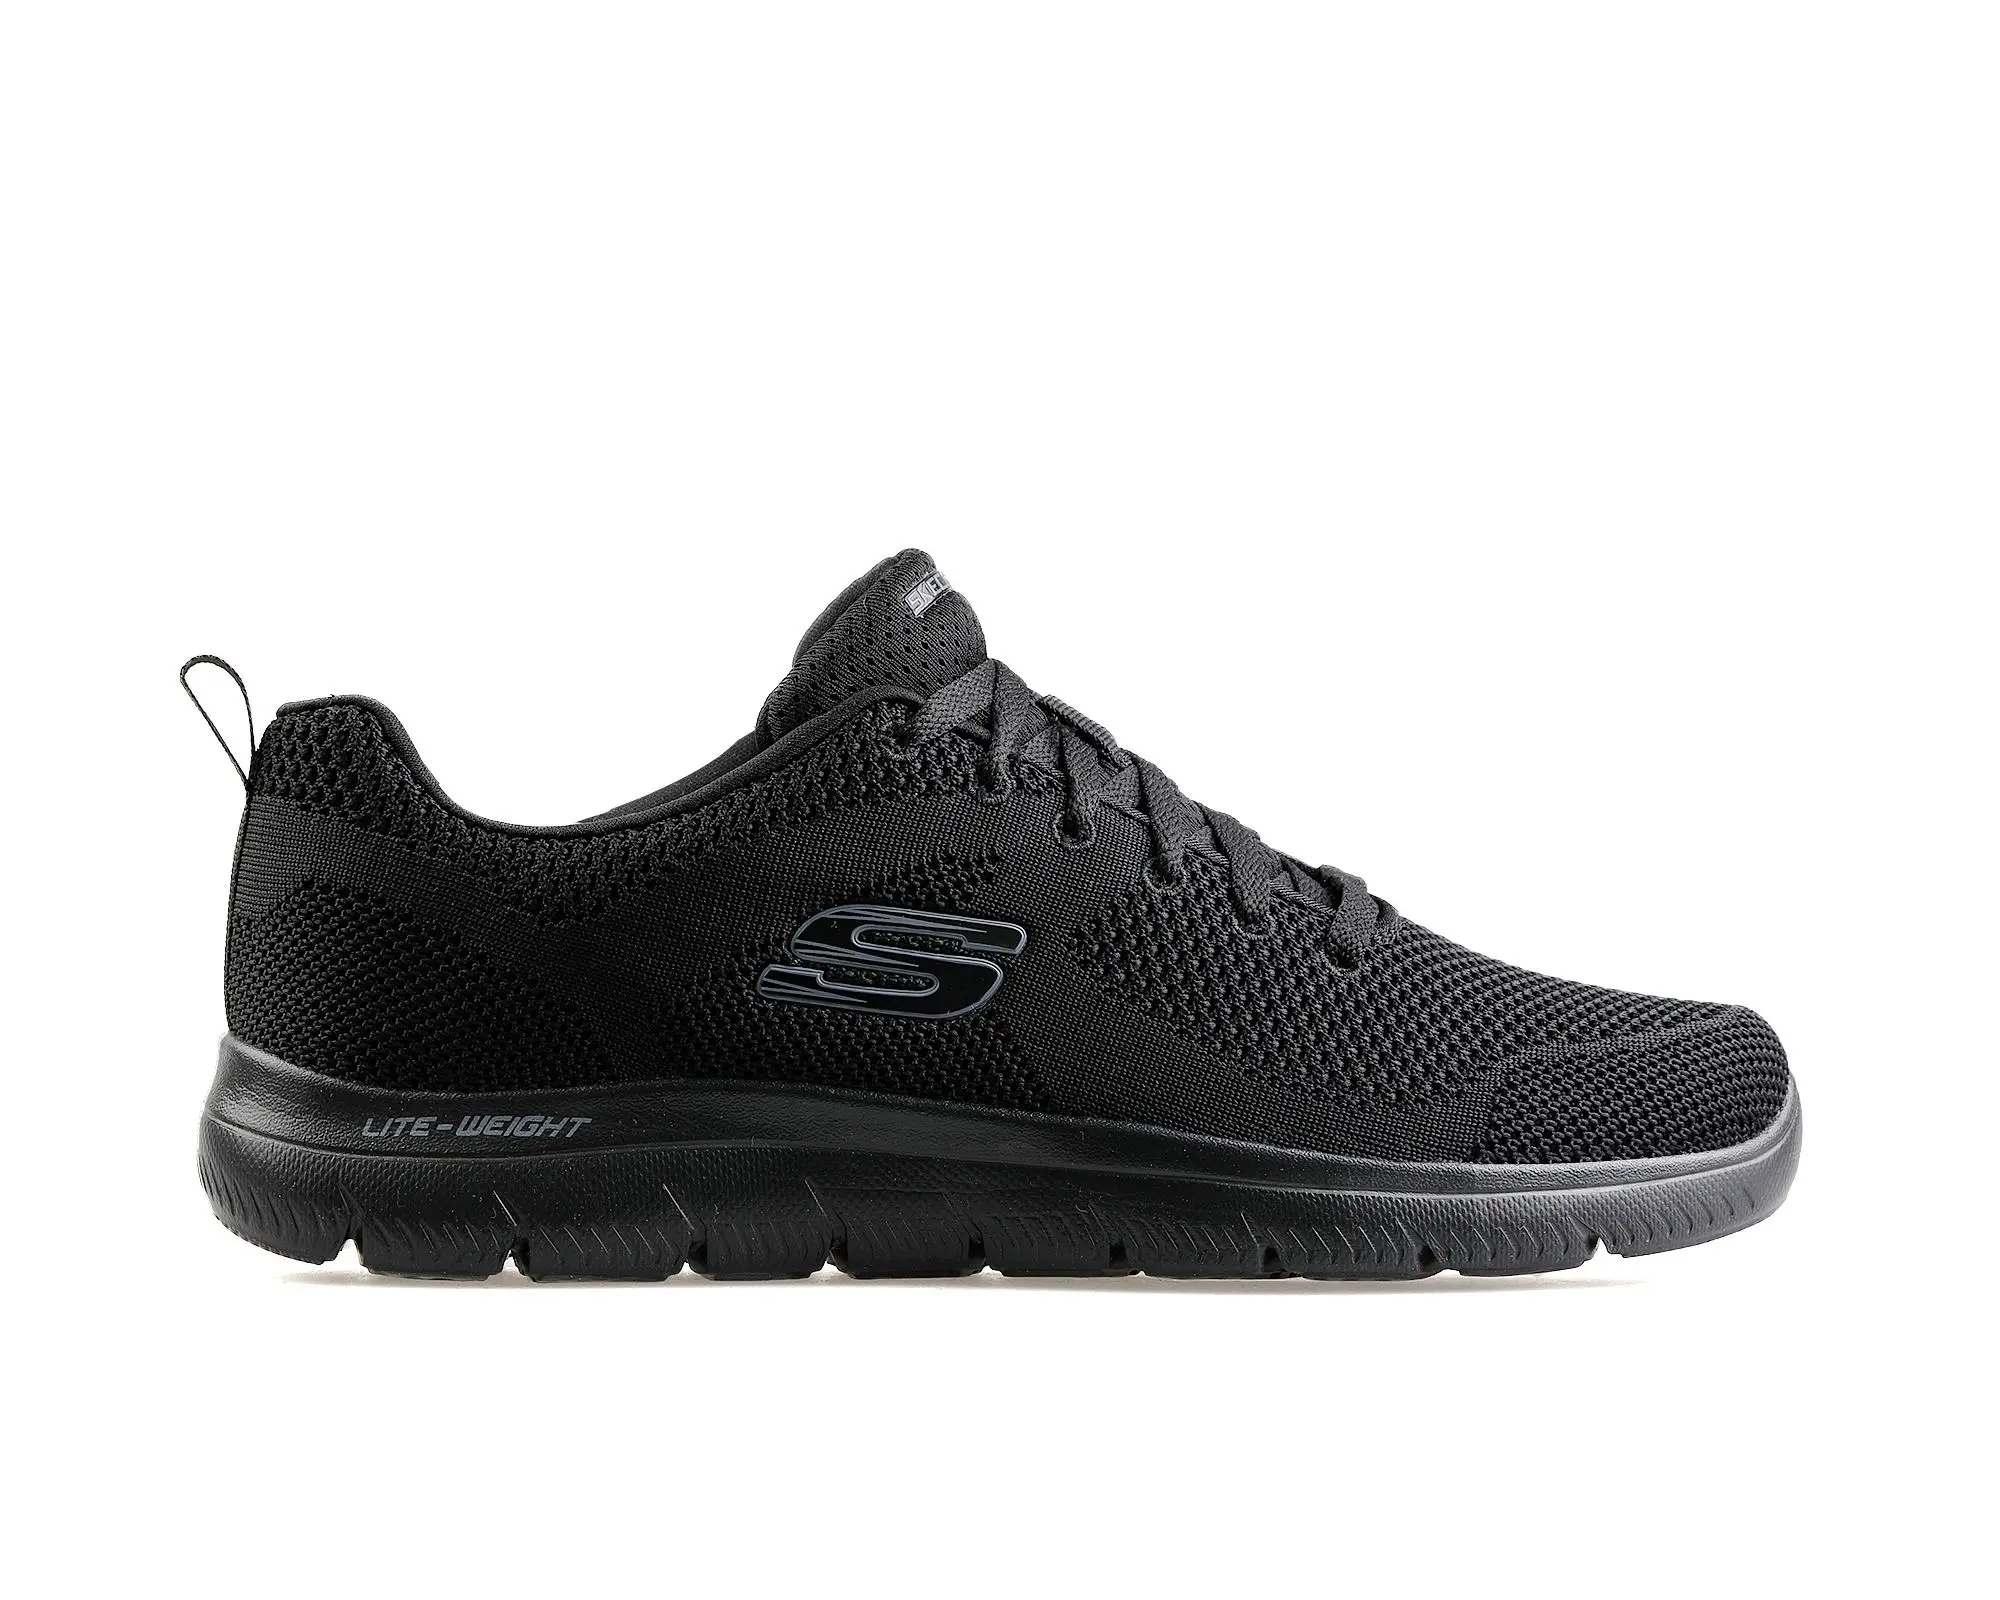 

Skechers Summit Shoes Mens Sneakers Fashion Lace-Up Casual Shoes Men's Flats Soft Sole Black Mens Shoes for Hiking